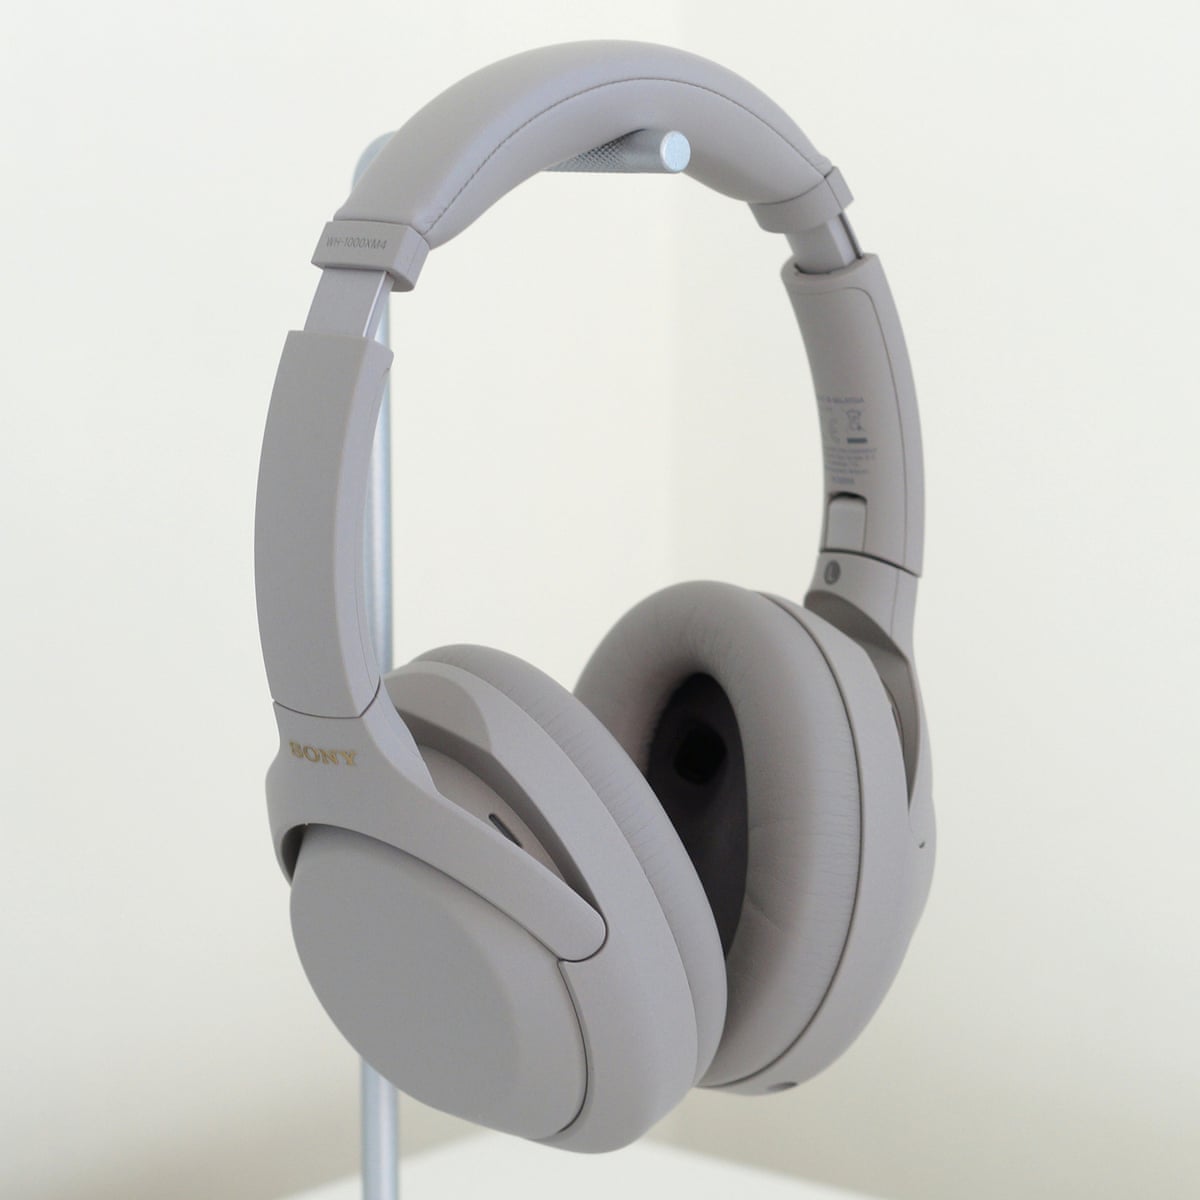 Sony WH-1000XM4 review: Bose-beating noise cancelling headphones